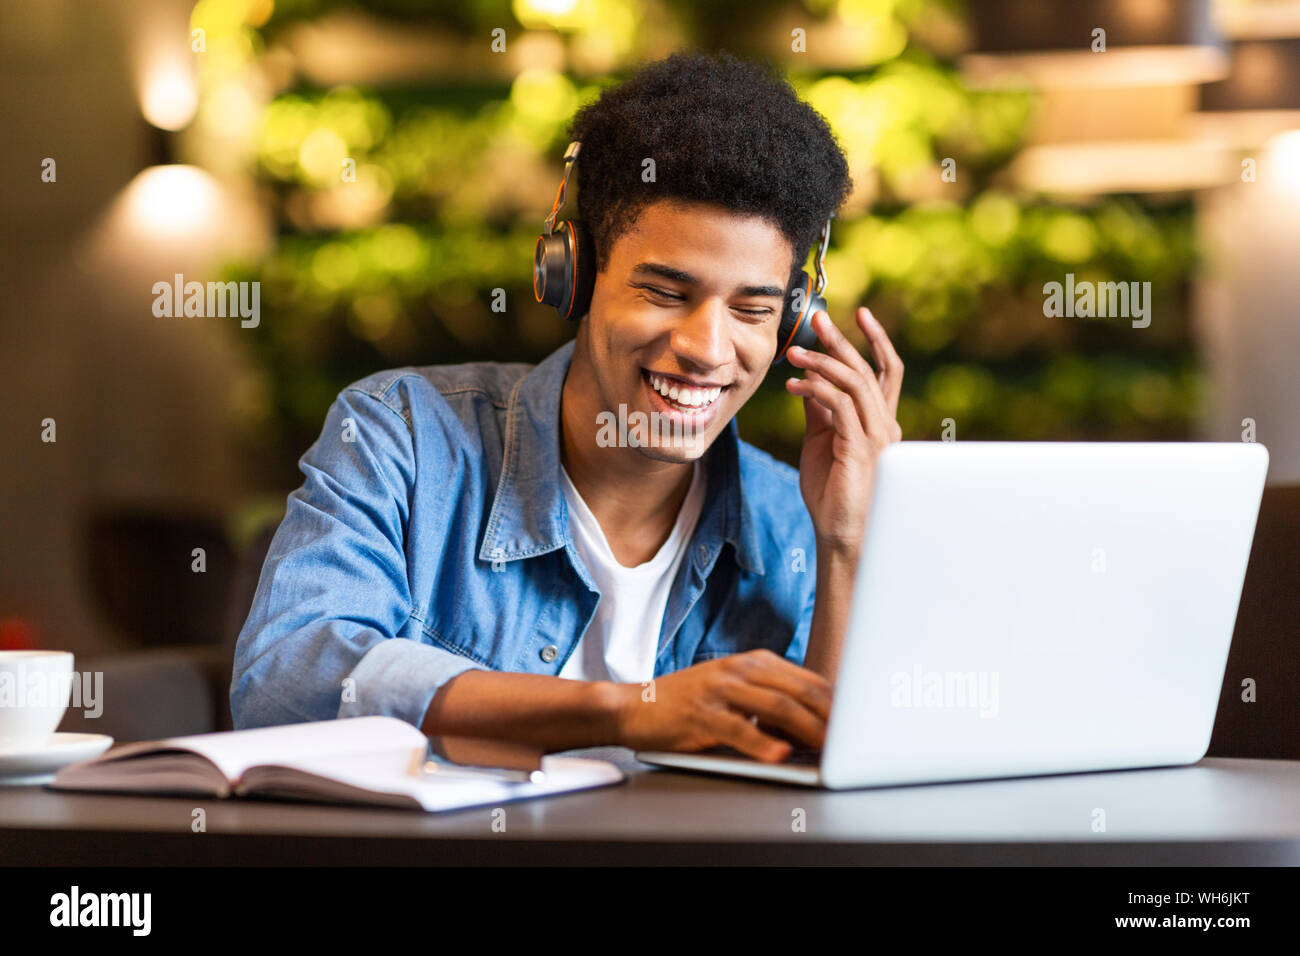 Cheerful teen guy with headset looking at laptop Stock Photo